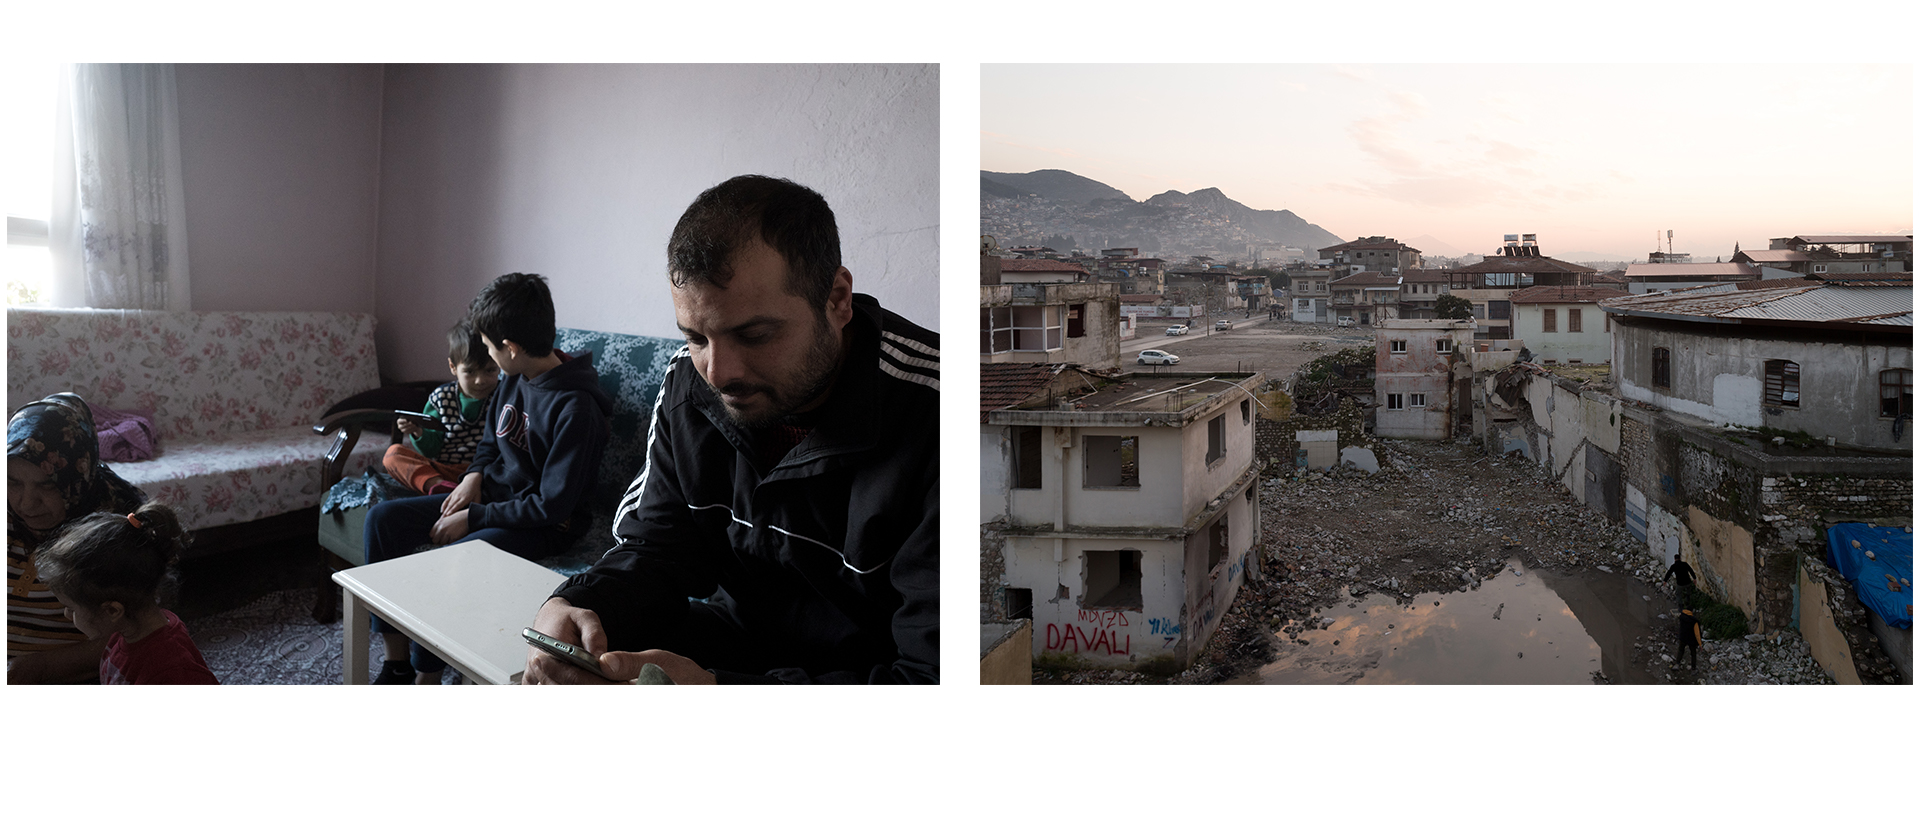 On the left, Adnan Dalmiş sits with his children and his mother. On the right is the Orhanli neighborhood of Antakya. (Kyriakos Finas)